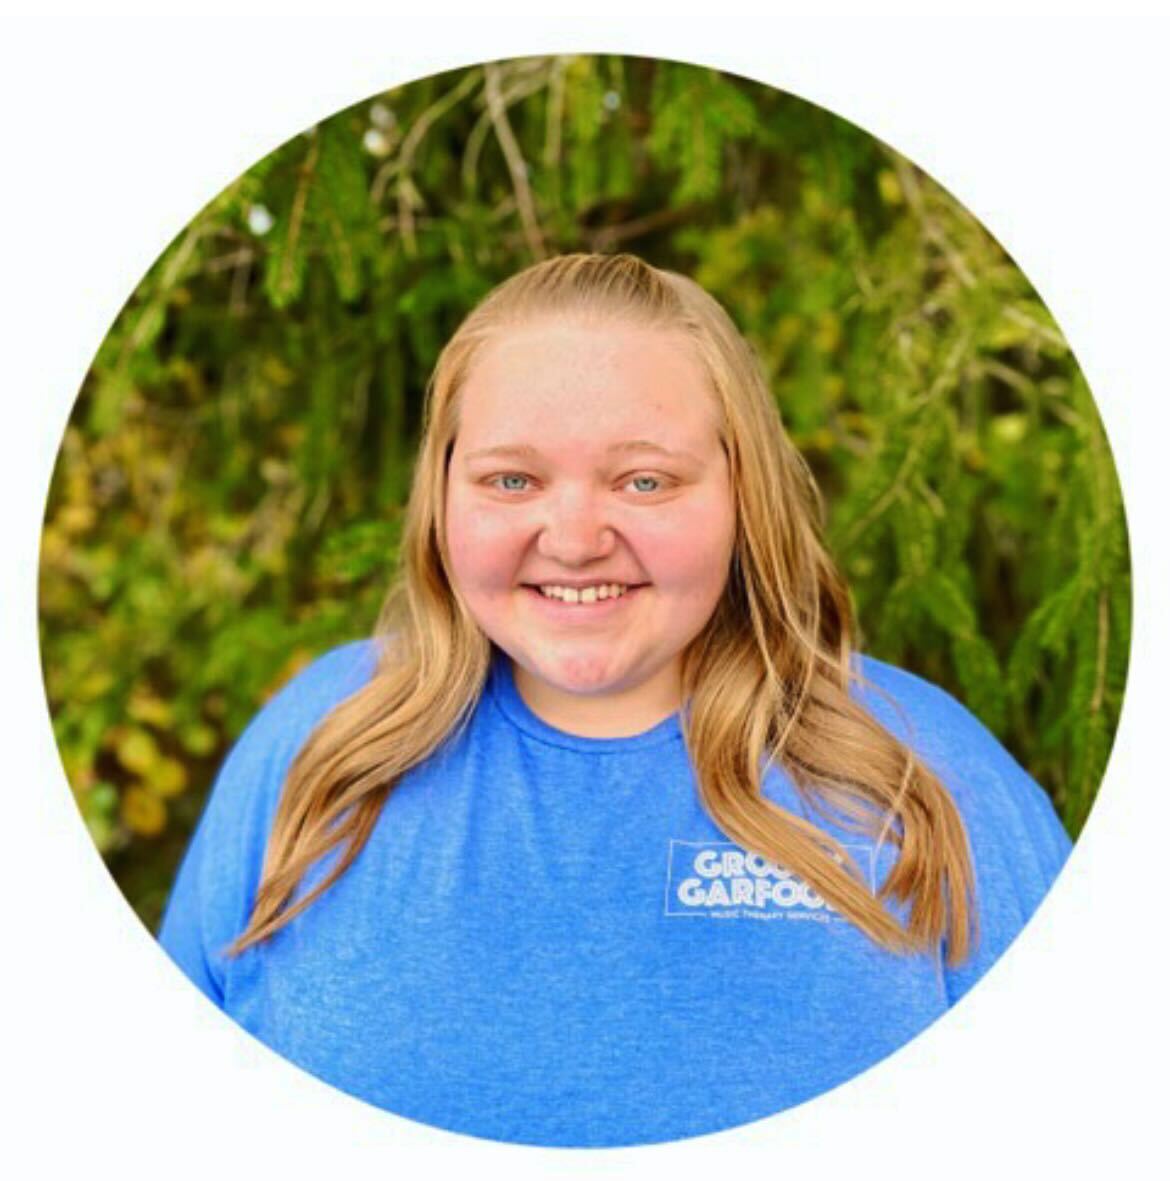 Our music therapist, Abby, is shown smiling, standing in front of greenery outside. Abby has long, wavy blonde-red hair and is wearing a blue groovy garfoose t-shirt.